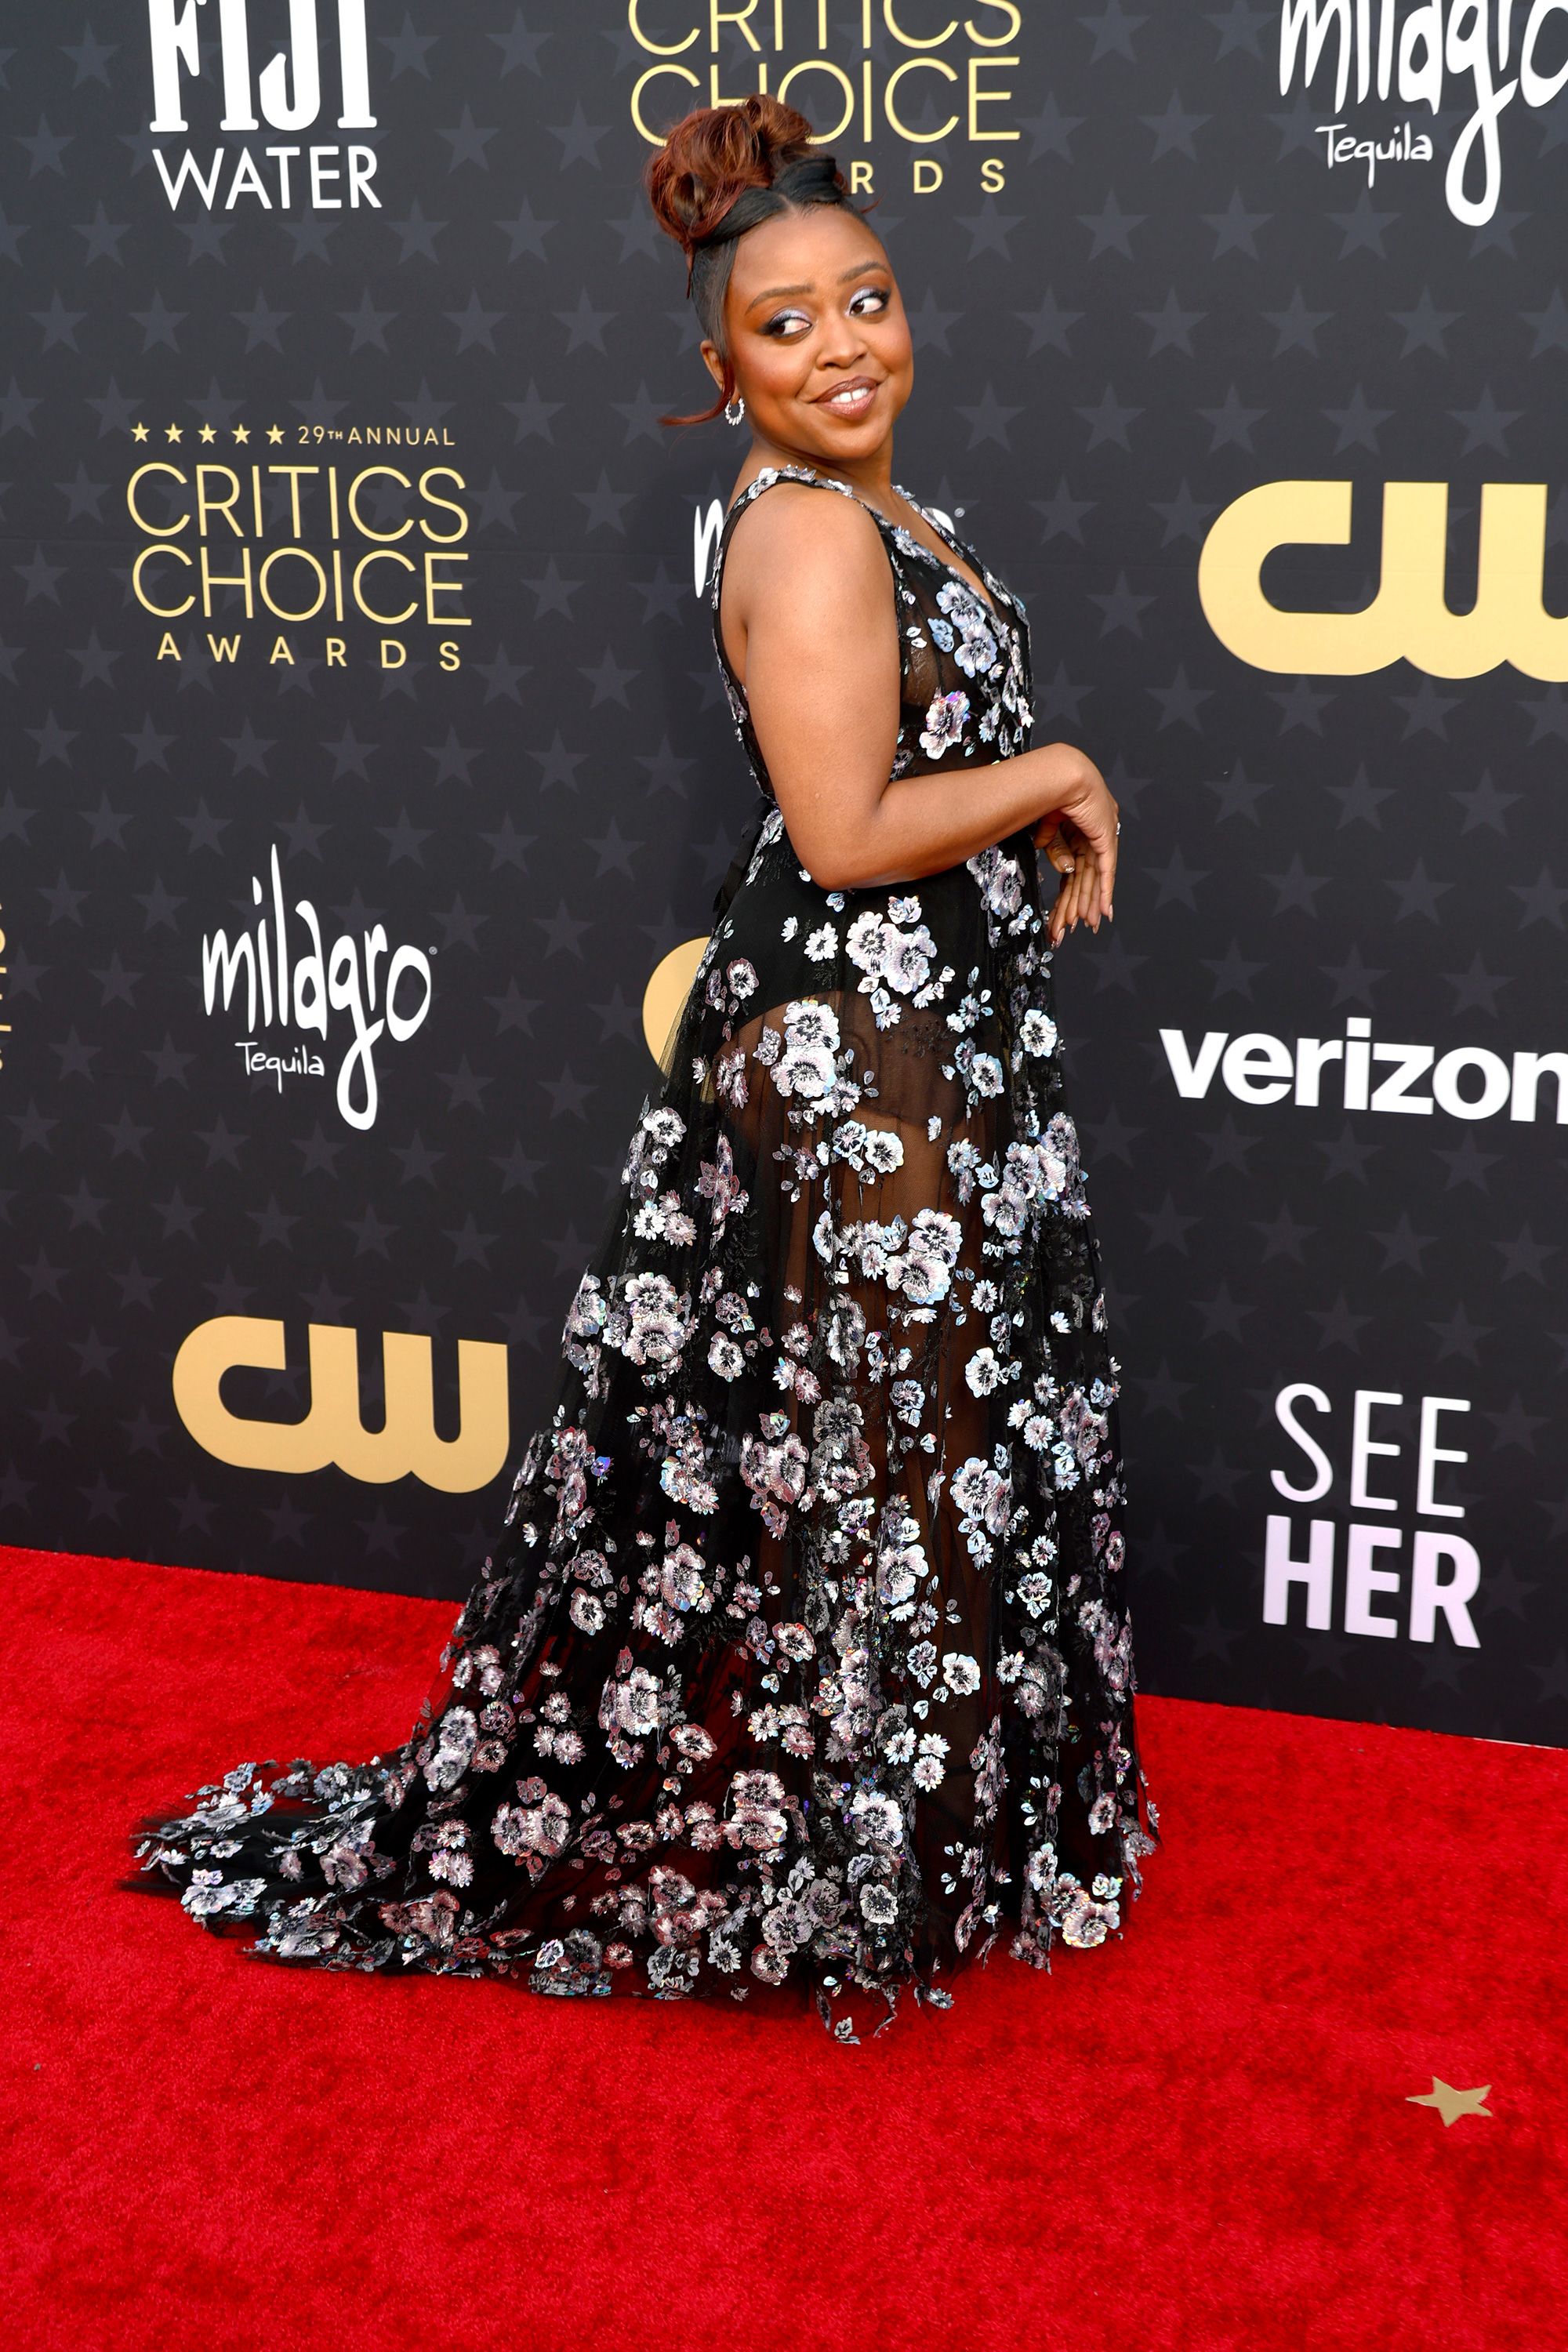 “Abbott Elementary” actor Quinta Brunson wore a sheer black Georges Hobeika dress with silvery embroidered flower accents and Nicole Rose jewelry.